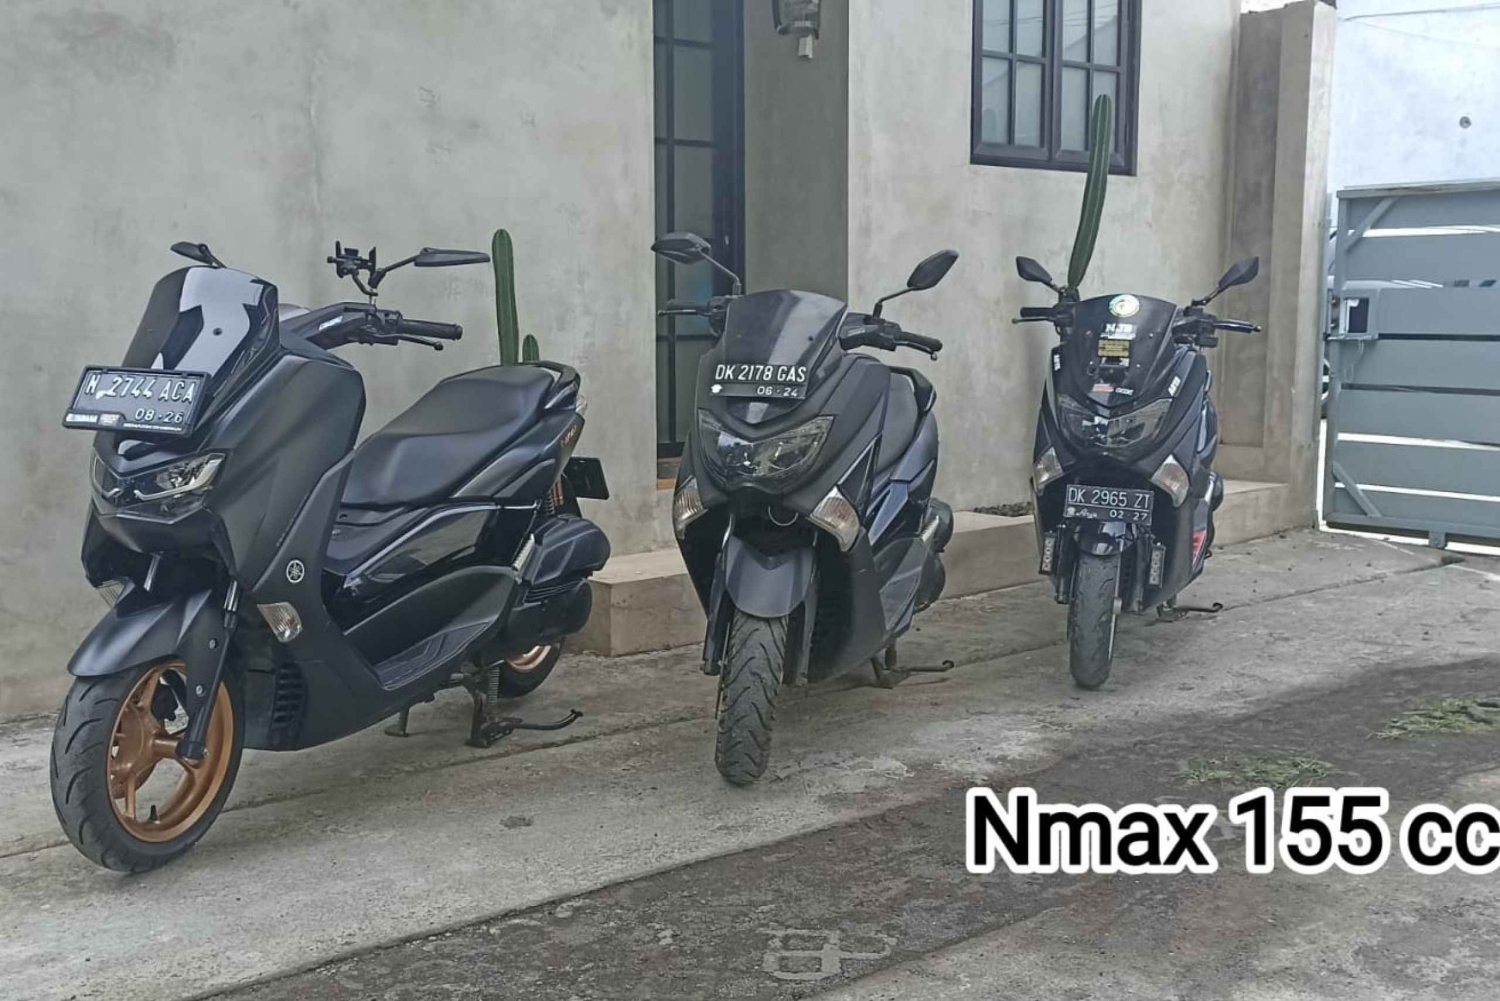 Bali: 2-7 dagers scooterutleie Xmax 250 cc/ Nmax 150cc/ Scoopy